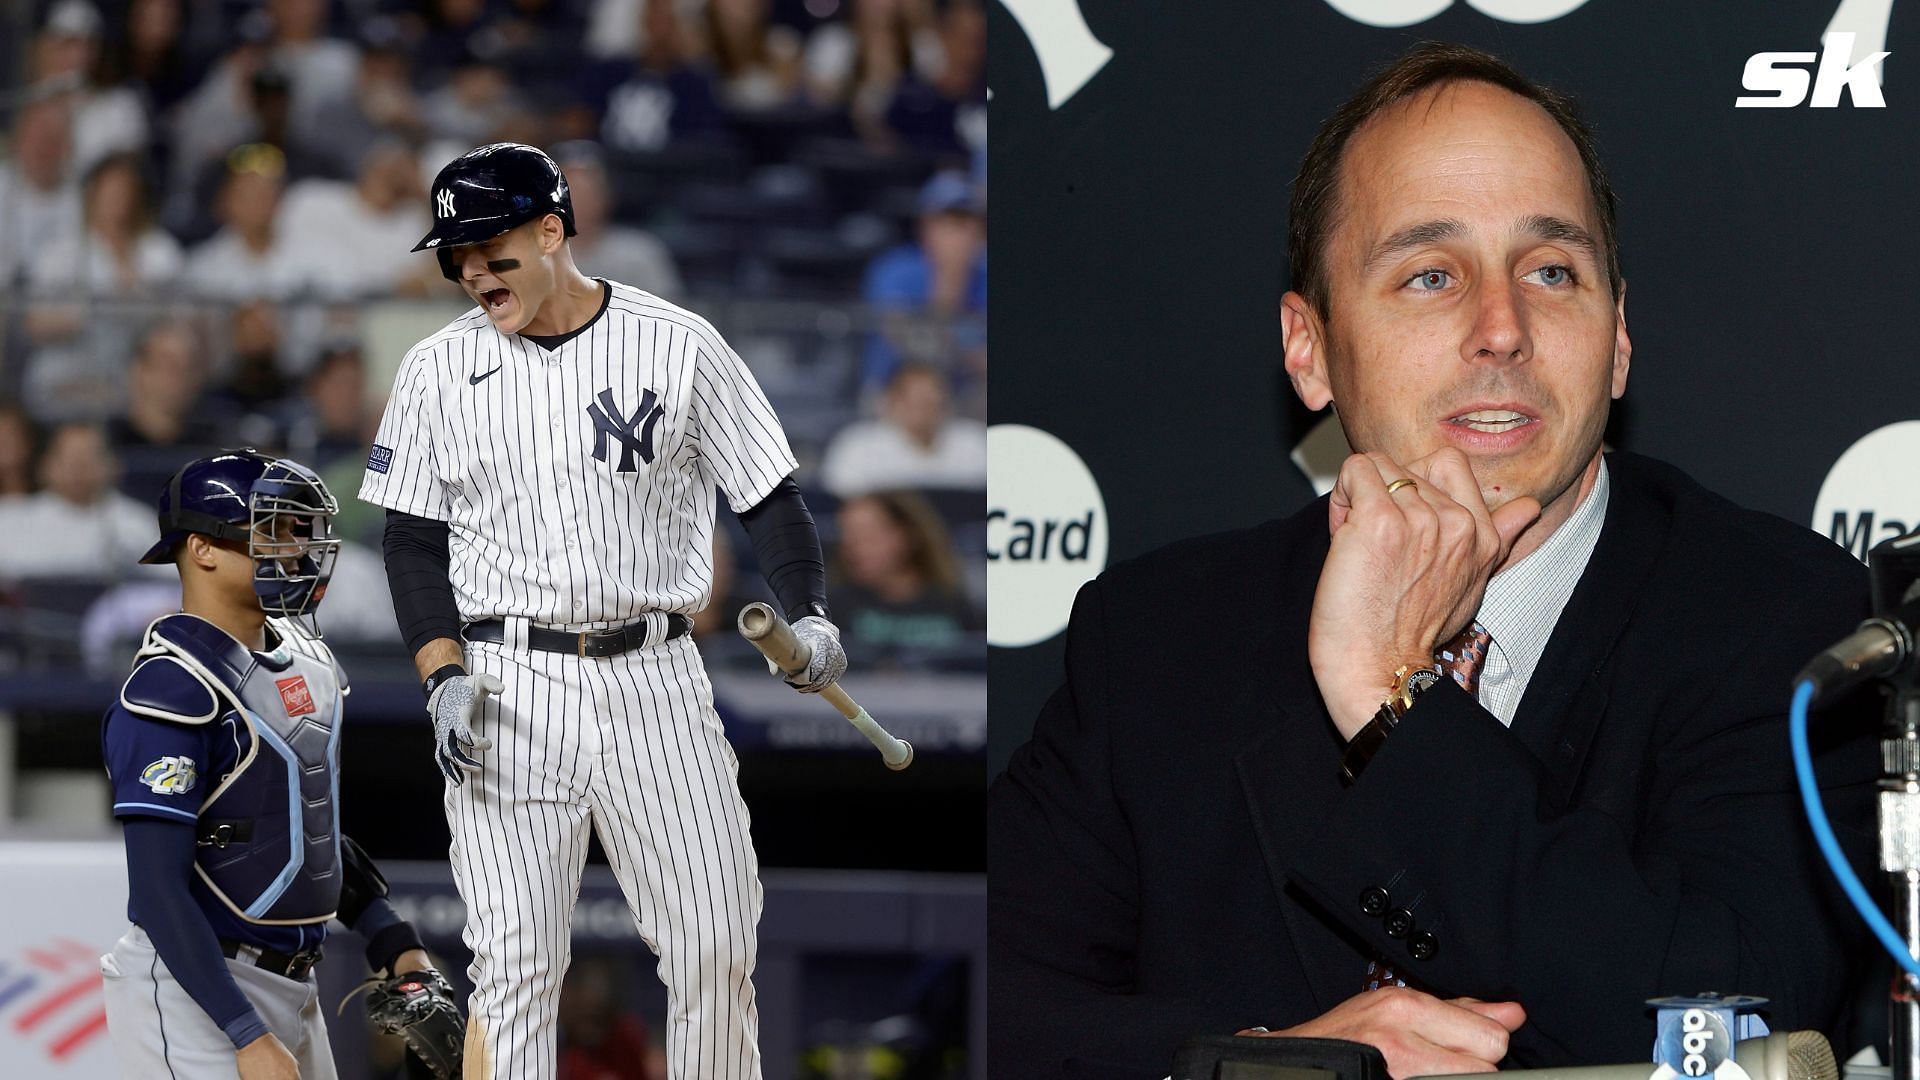 Brian Cashman has served as the Yankees